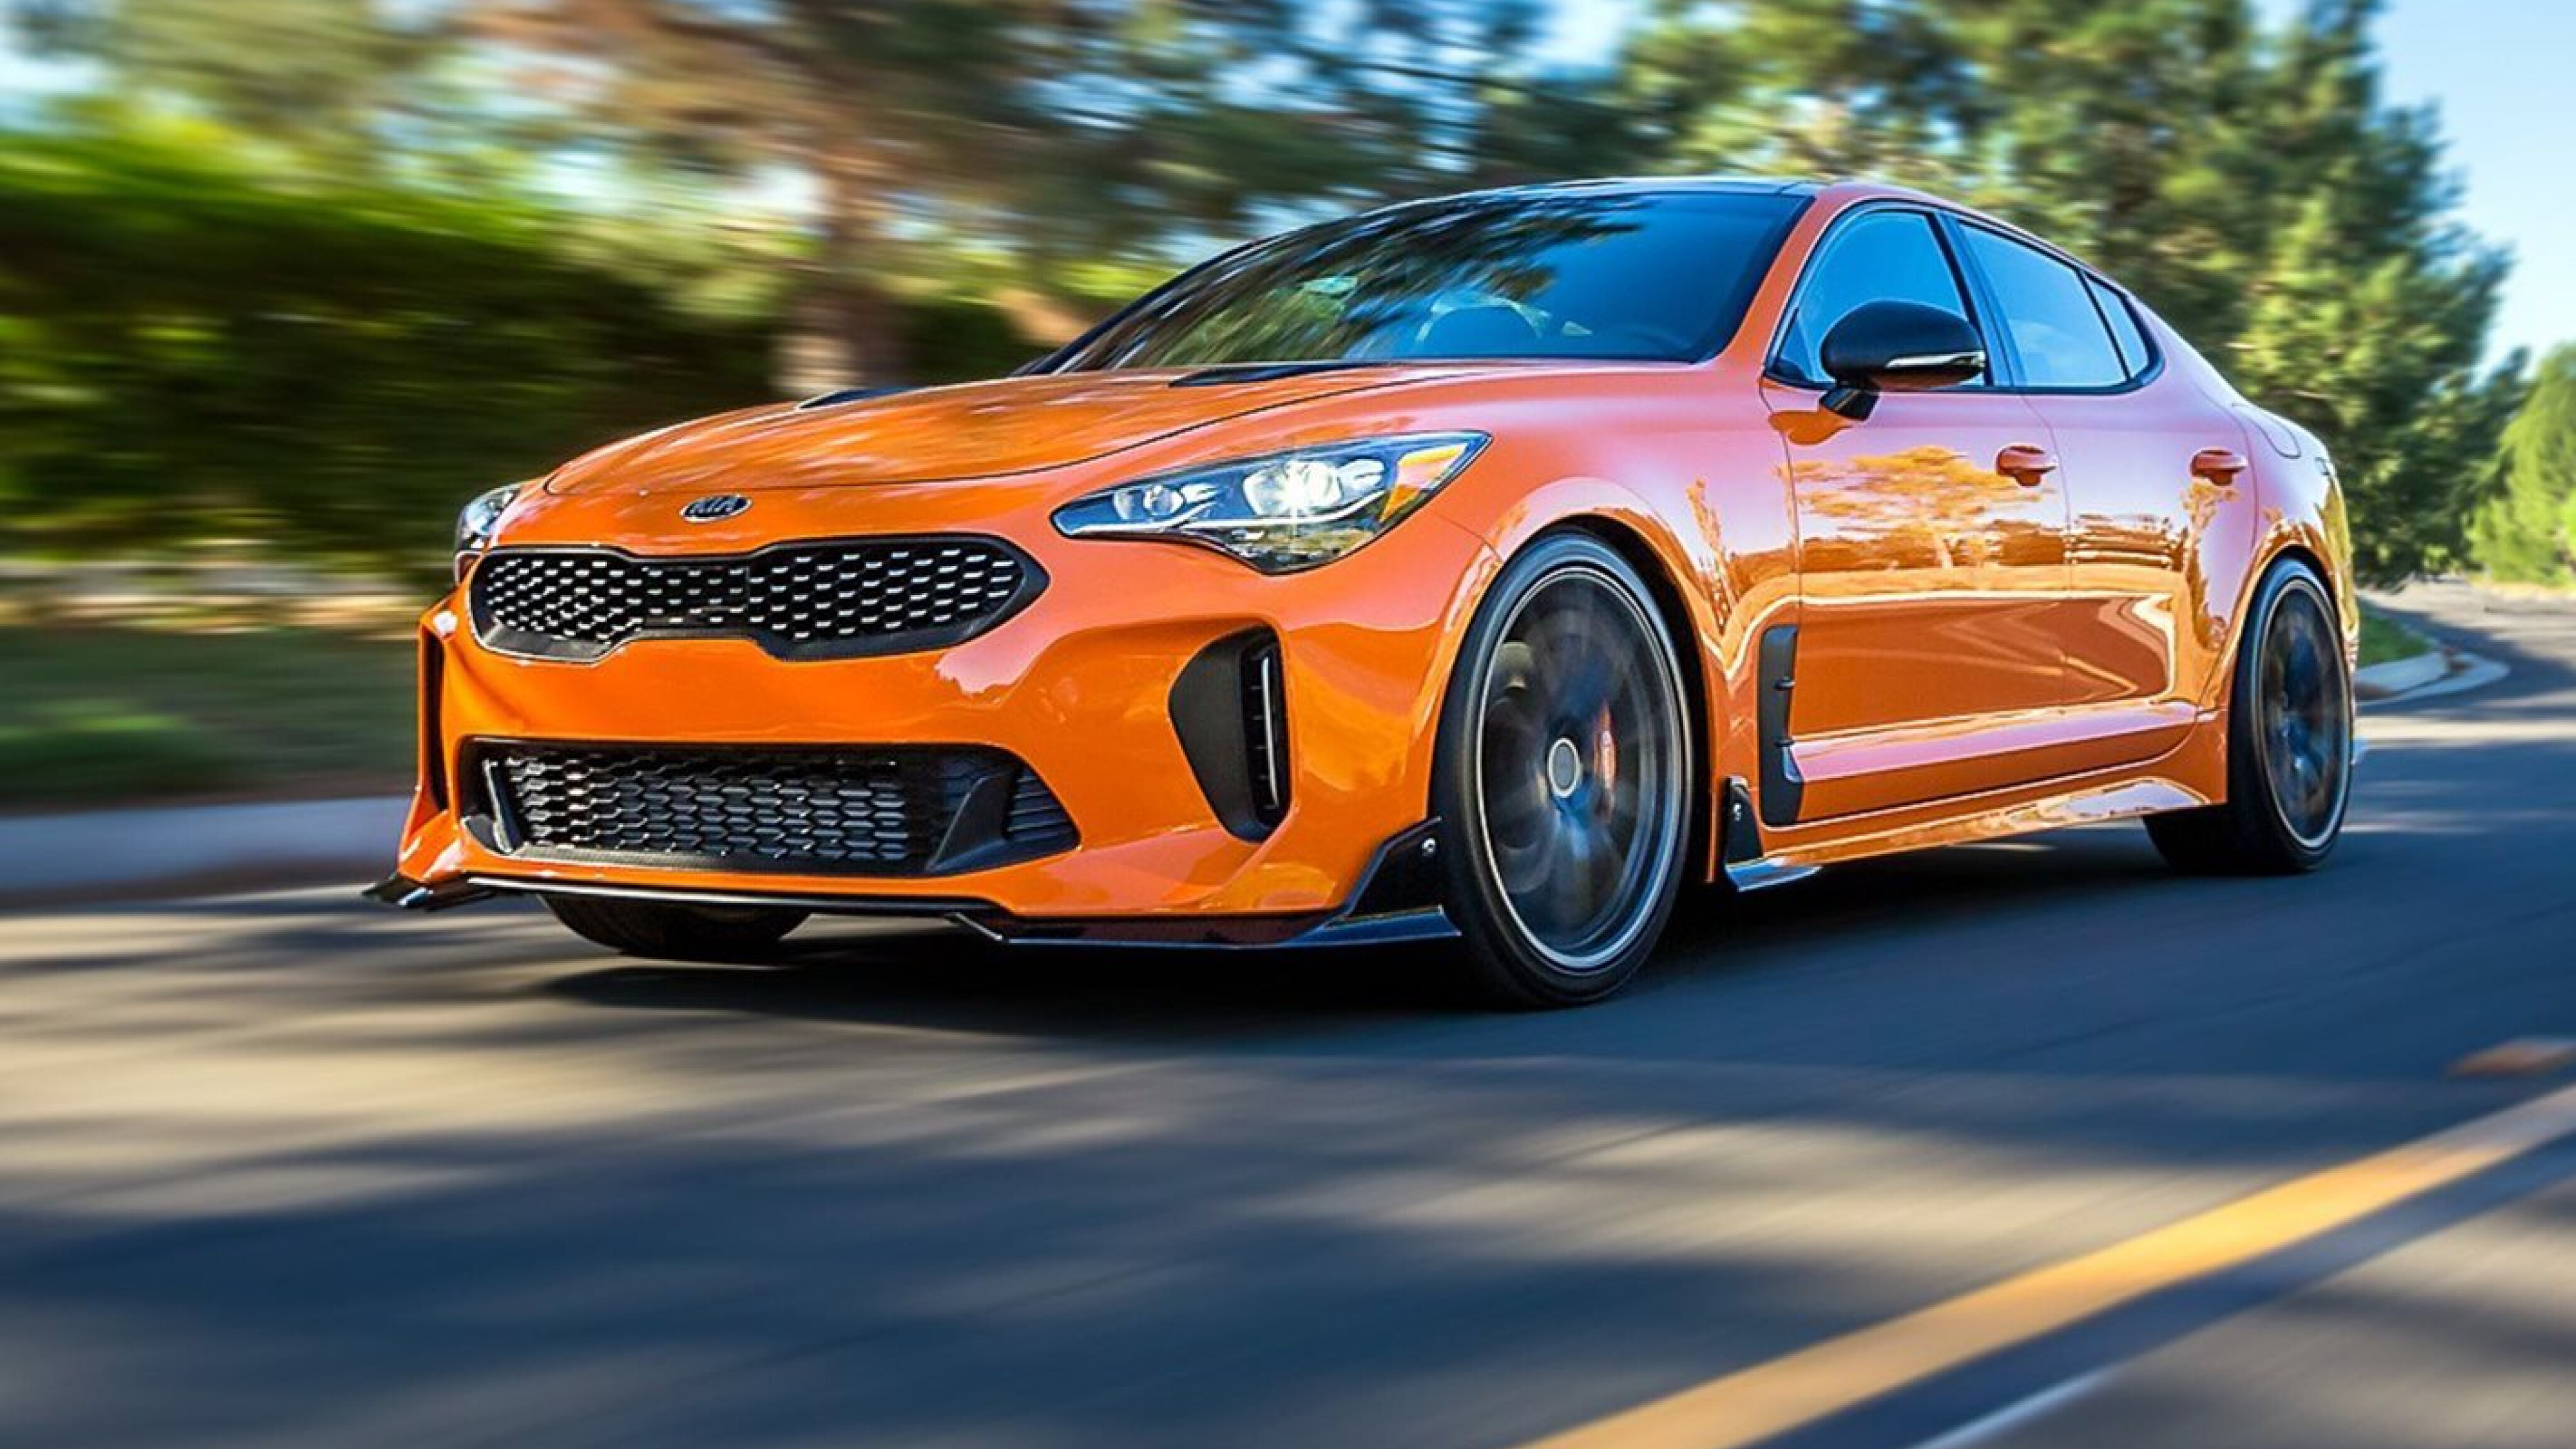 SEMA 2017: Kia Stinger aftermarket special editions revealed